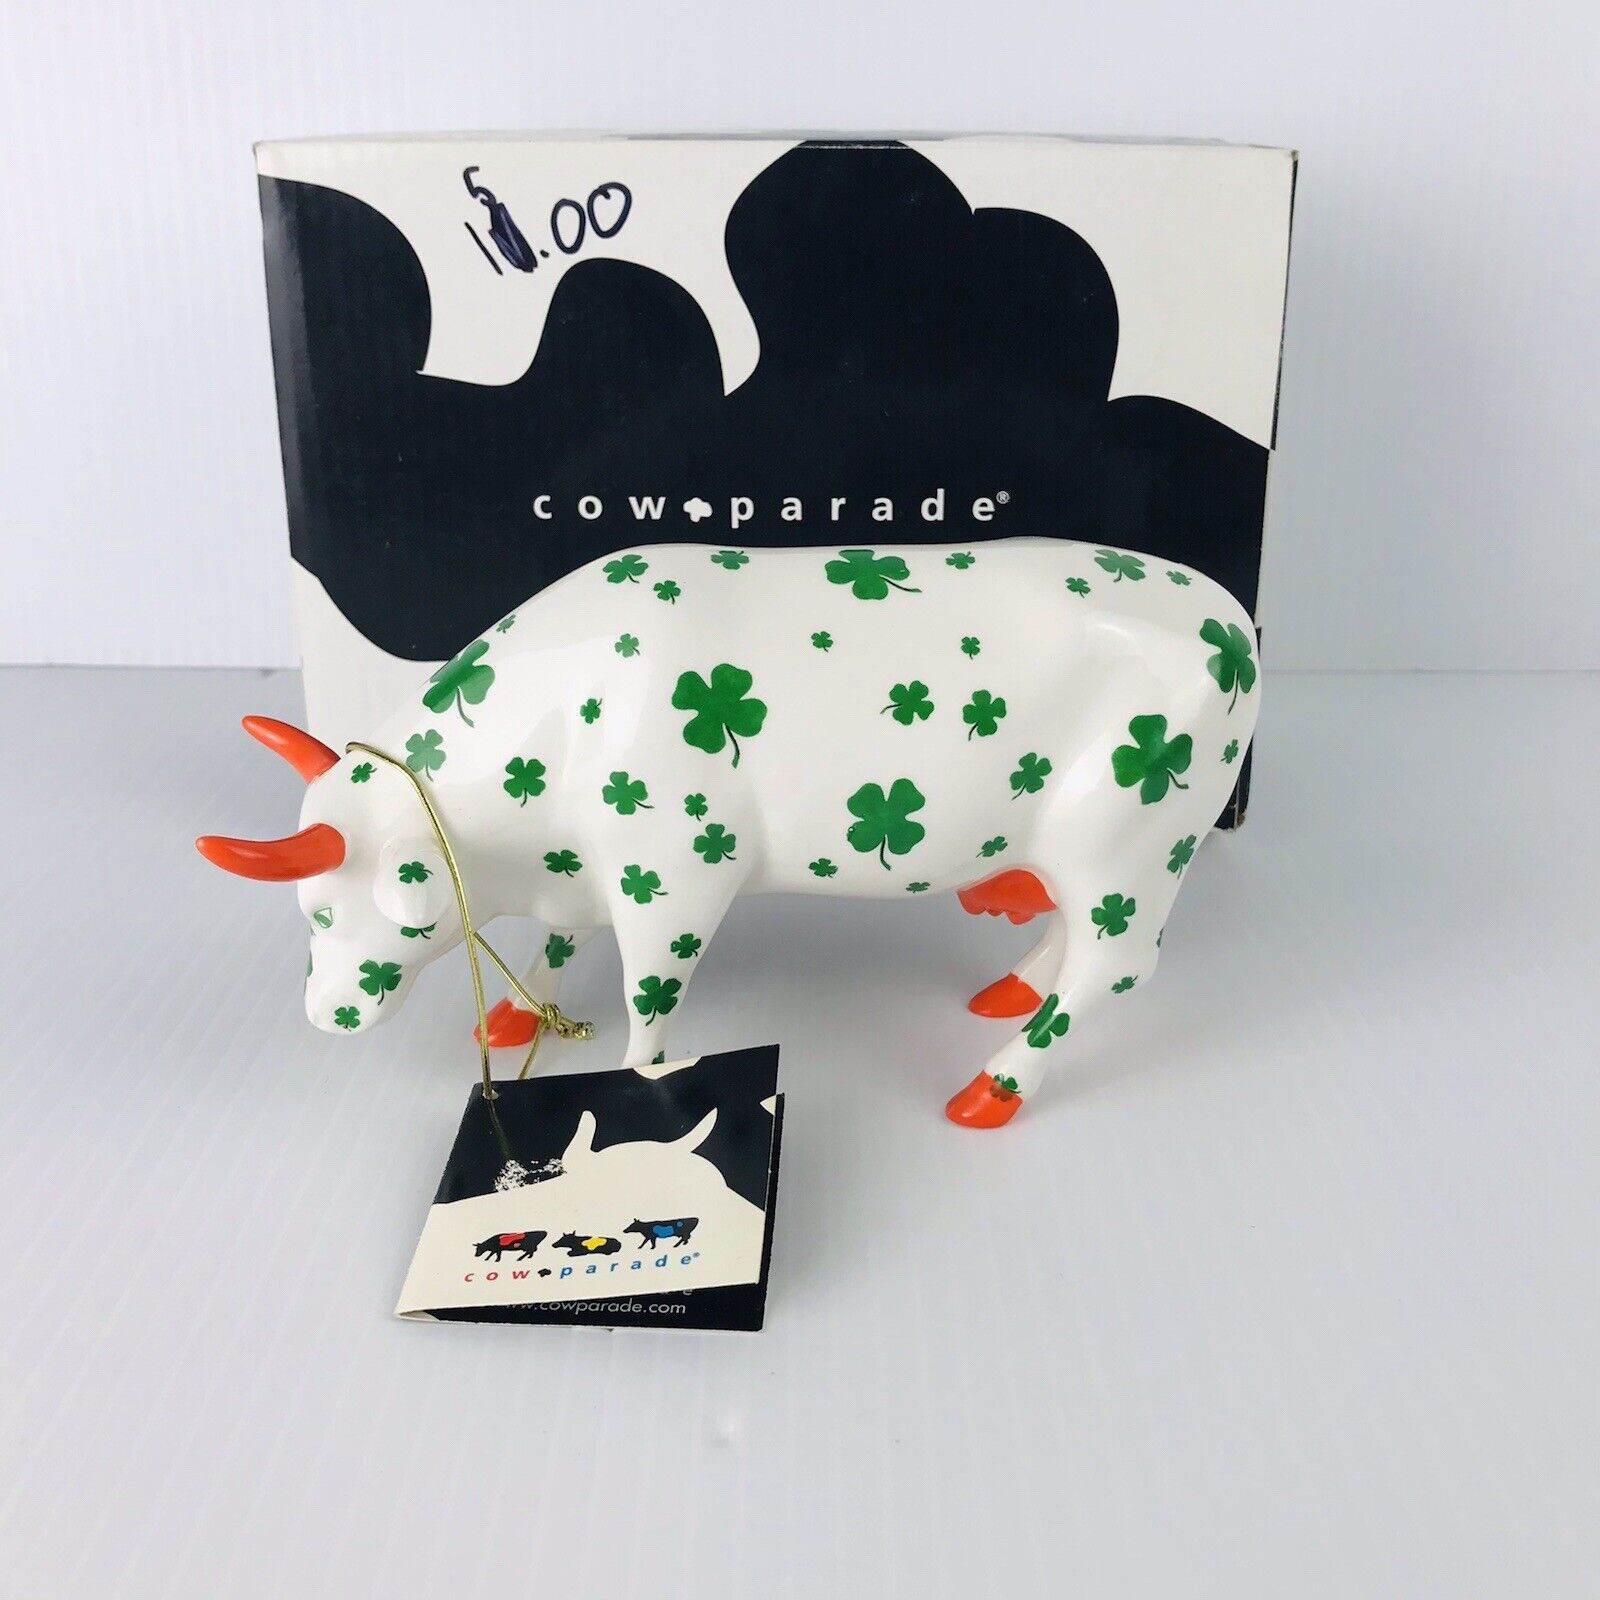 2004 #7319 LUCKY COW Cow Parade Porcelain figurine BOXED w/tag CowParade